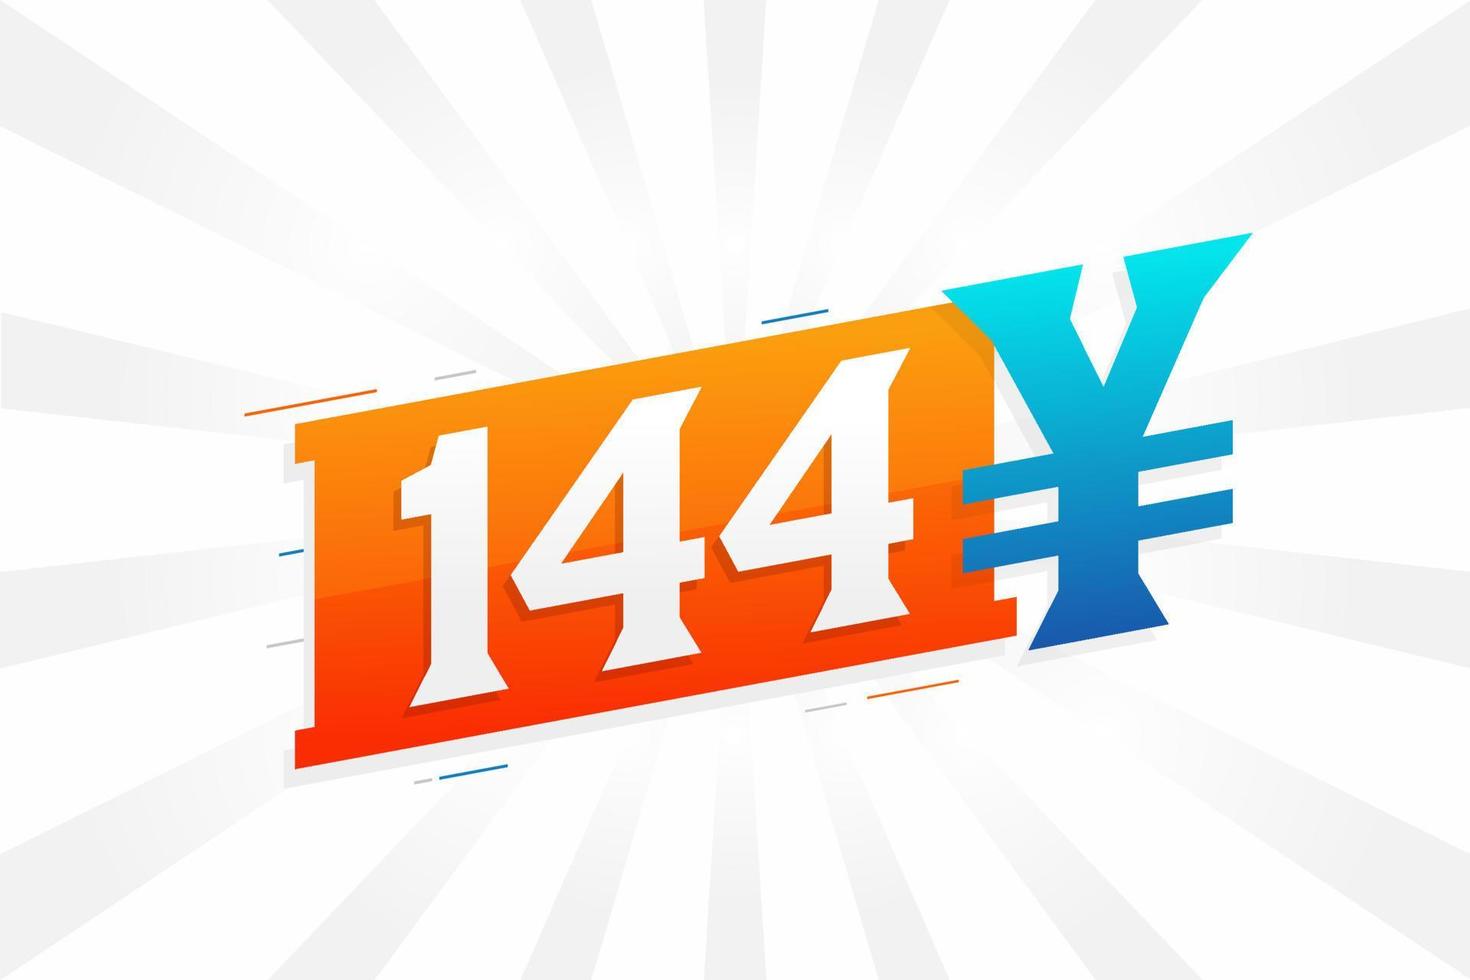 144 Yuan Chinese currency vector text symbol. 144 Yen Japanese currency Money stock vector